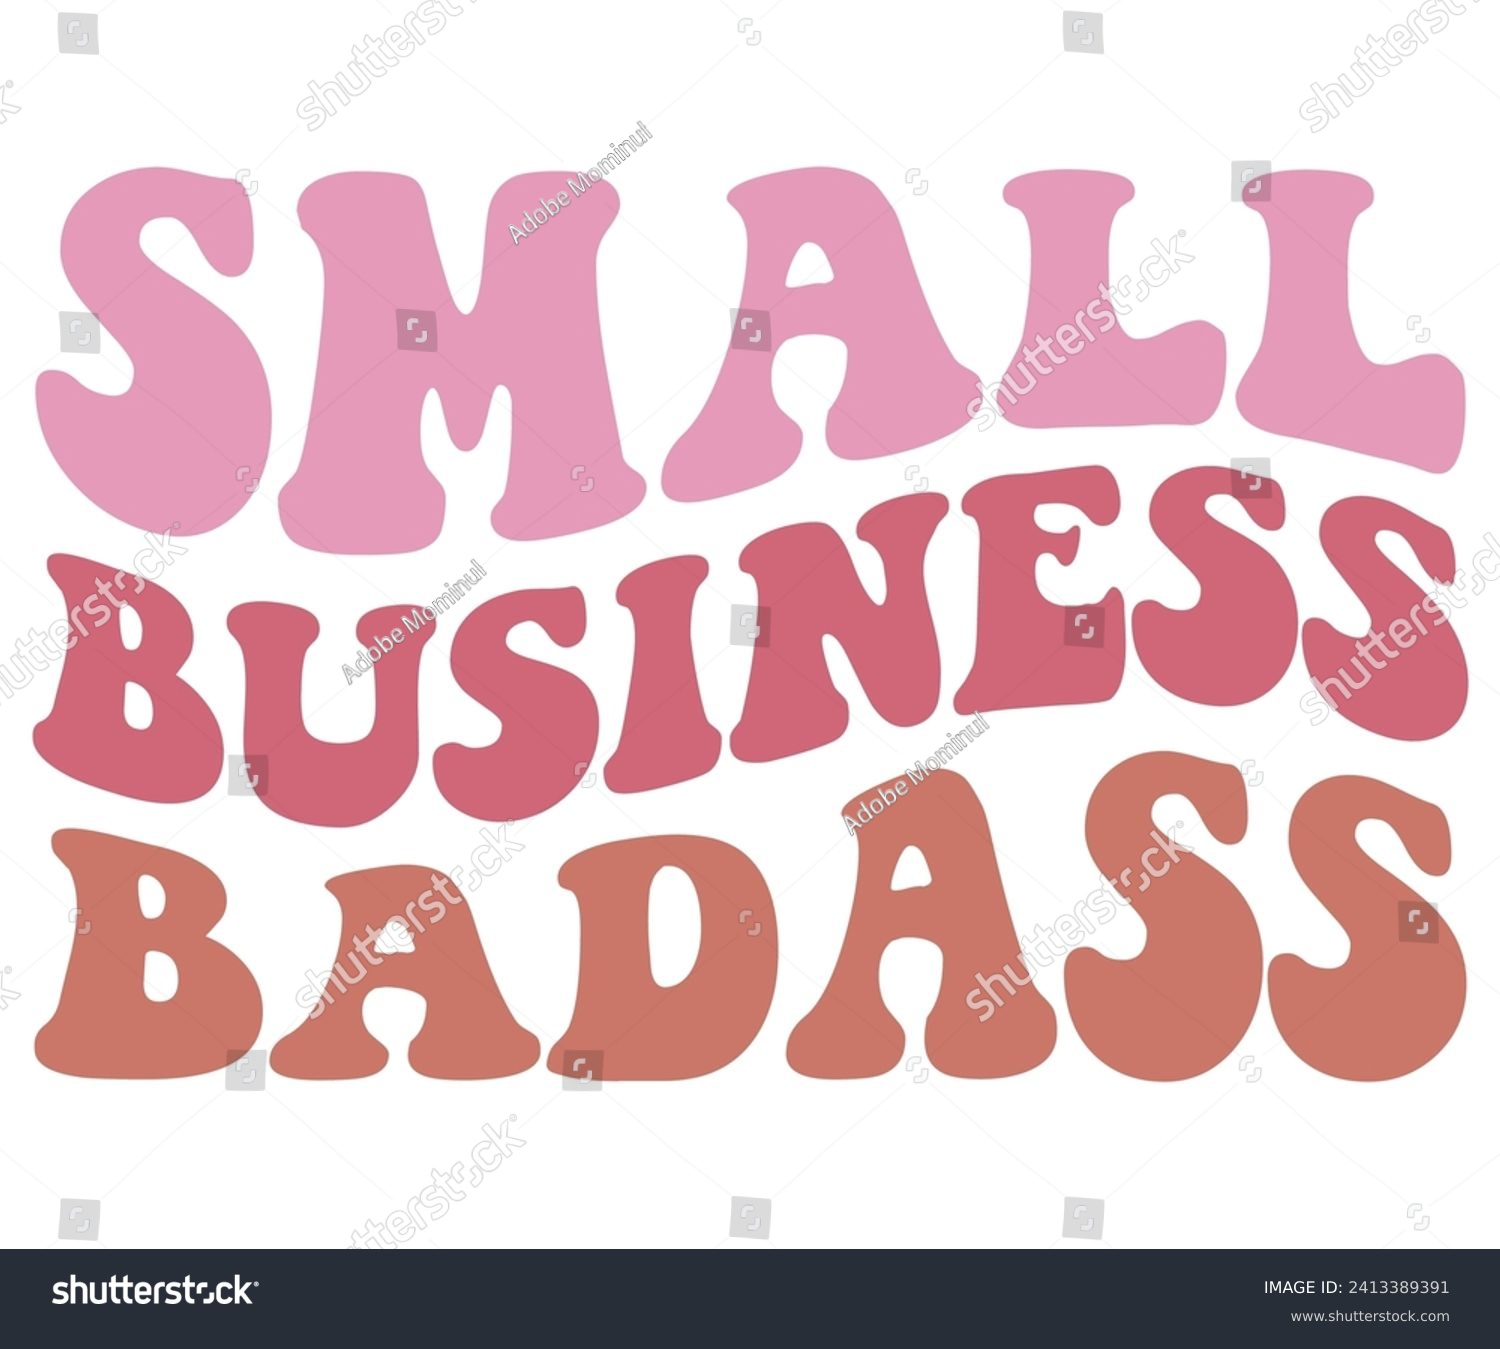 SVG of Small business badass Svg,Mothers Day Svg,Png,Mom Quotes Svg,Funny Mom Svg,Gift For Mom Svg,Mom life Svg,Mama Svg,Mommy T-shirt Design,Svg Cut File,Dog Mom deisn,Retro Groovy,Auntie T-shirt Design, svg